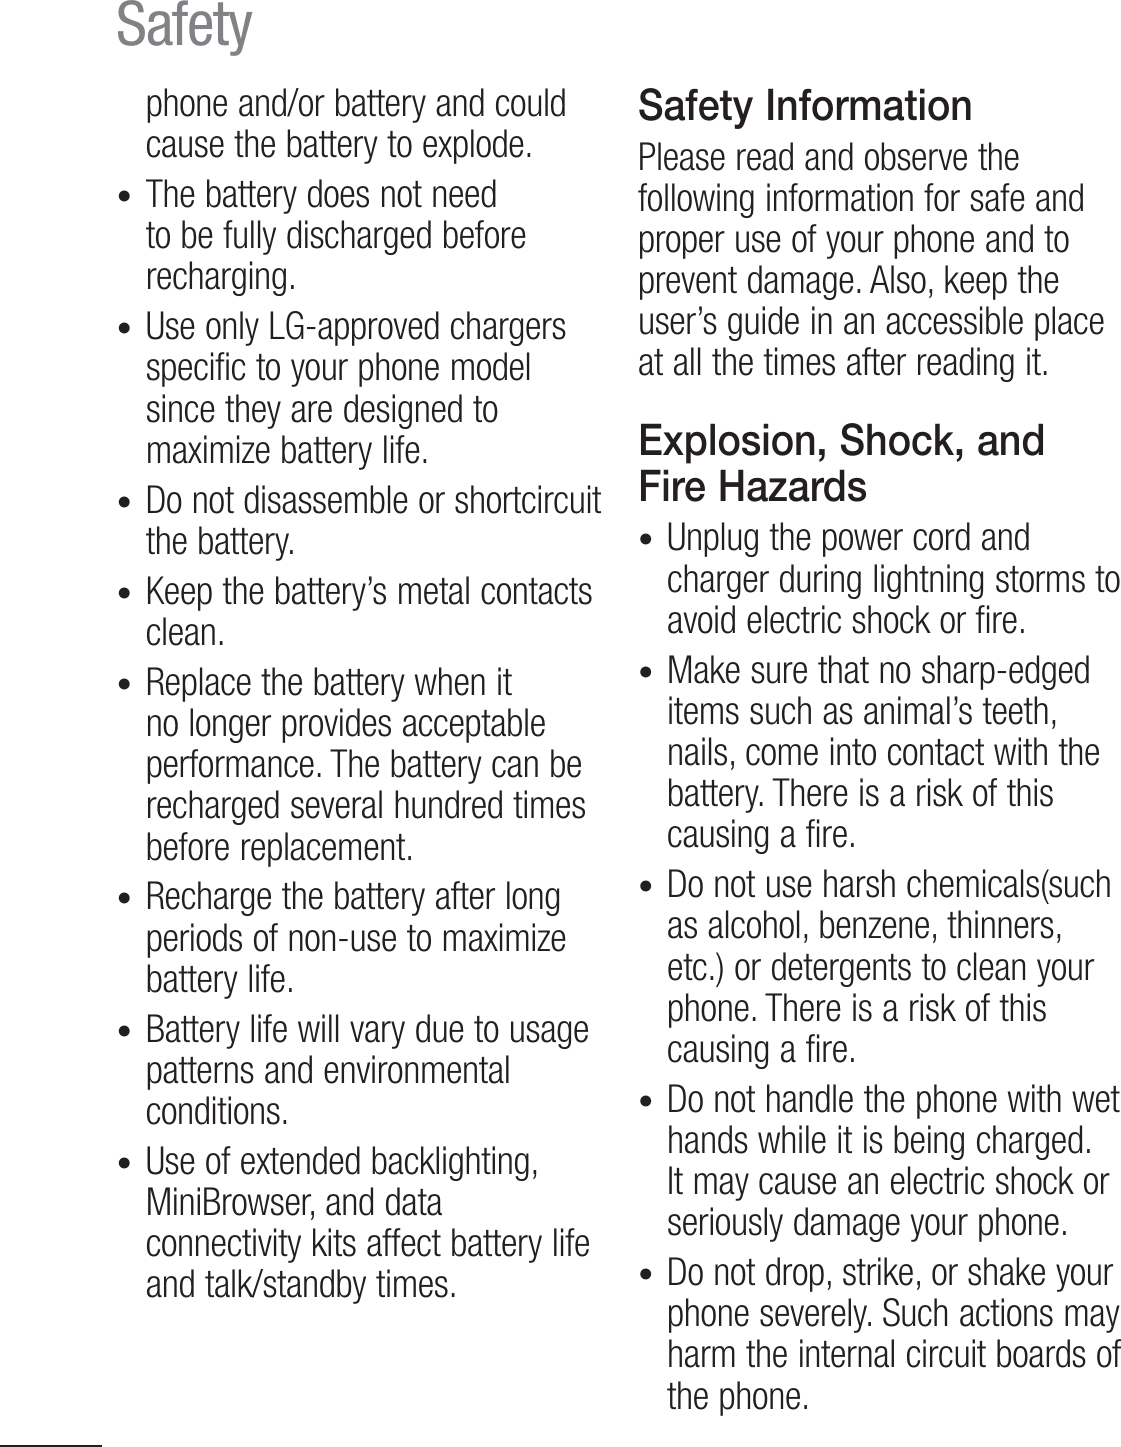 8Safetyphone and/or battery and could cause the battery to explode.t  The battery does not need to be fully discharged before recharging.t Use only LG-approved chargers specific to your phone model since they are designed to maximize battery life.t Do not disassemble or shortcircuit the battery.t Keep the battery’s metal contacts clean.t Replace the battery when it no longer provides acceptable performance. The battery can be recharged several hundred times before replacement.t Recharge the battery after long periods of non-use to maximize battery life.t Battery life will vary due to usage patterns and environmental conditions.t Use of extended backlighting, MiniBrowser, and data connectivity kits affect battery life and talk/standby times.Safety InformationPlease read and observe the following information for safe and proper use of your phone and to prevent damage. Also, keep the user’s guide in an accessible place at all the times after reading it.Explosion, Shock, and Fire Hazardst Unplug the power cord and charger during lightning storms to avoid electric shock or fire.t Make sure that no sharp-edged items such as animal’s teeth, nails, come into contact with the battery. There is a risk of this causing a fire.t  Do not use harsh chemicals(such as alcohol, benzene, thinners, etc.) or detergents to clean your phone. There is a risk of this causing a fire.t Do not handle the phone with wet hands while it is being charged. It may cause an electric shock or seriously damage your phone.t Do not drop, strike, or shake your phone severely. Such actions may harm the internal circuit boards of the phone.